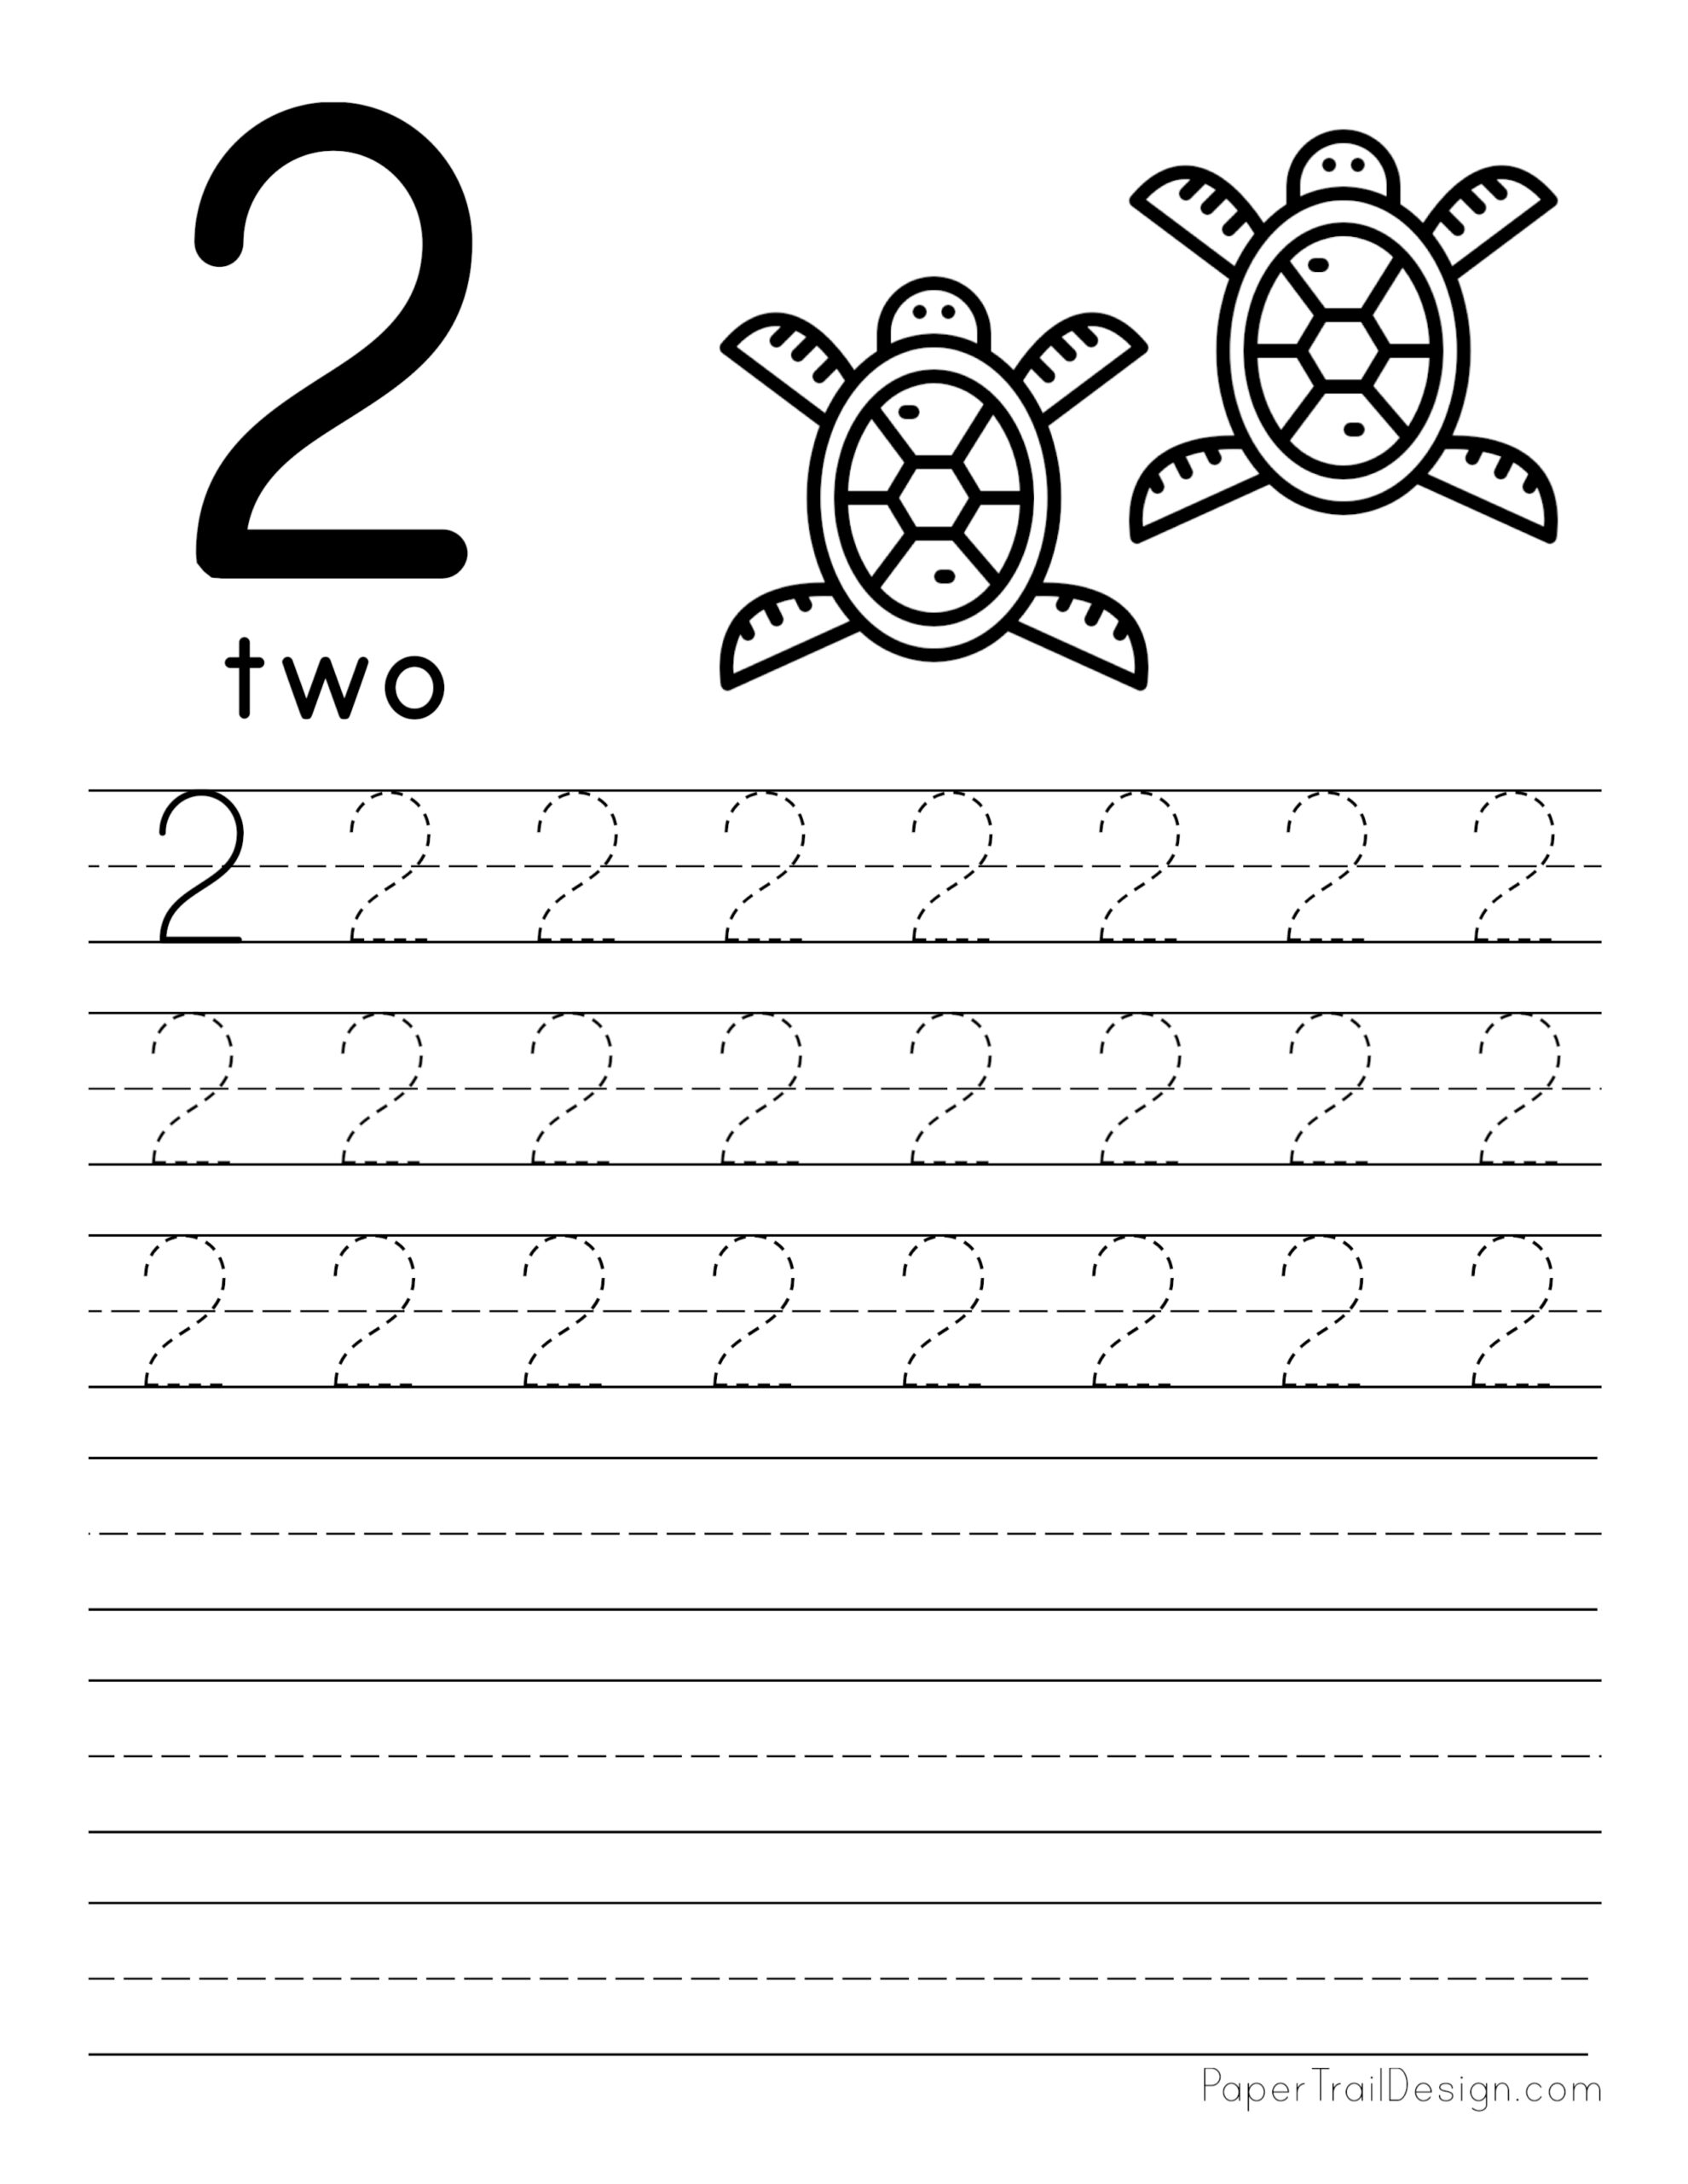 Printable Worksheets For Tracing The Number 2